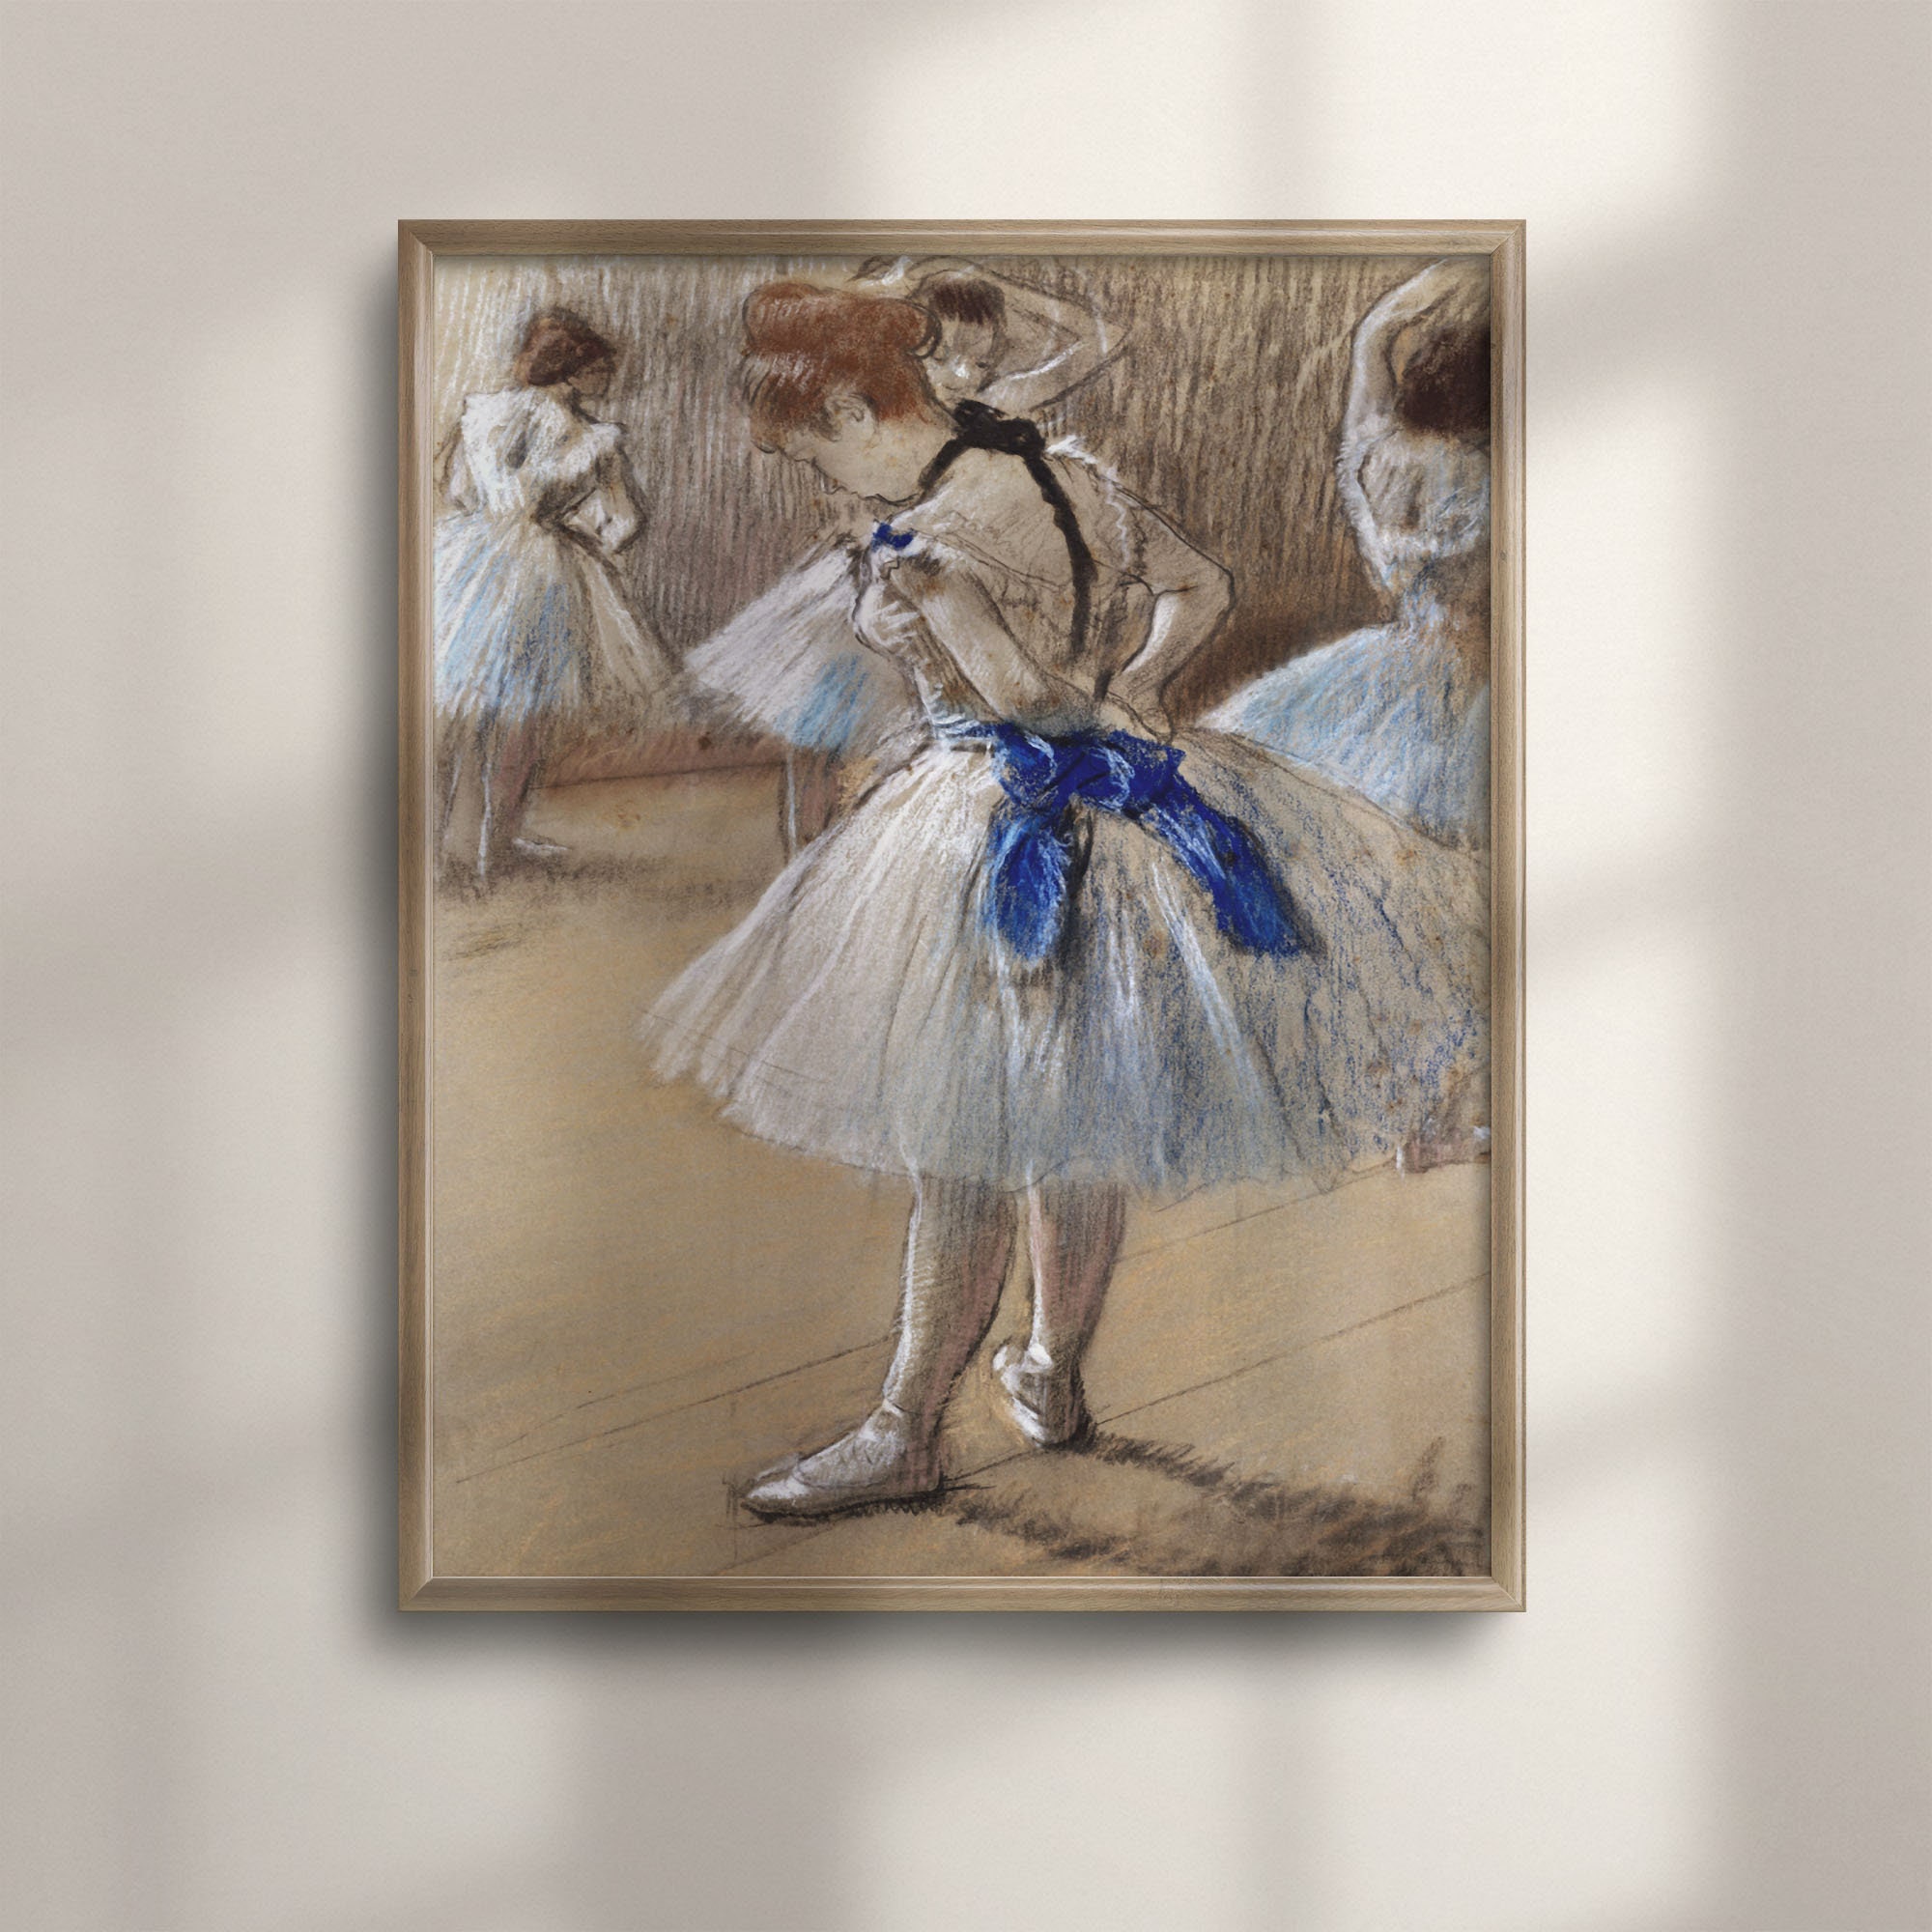  Edgar Degas,Two Dancers Resting Drawing,art Prints,Vintage Art, canvas Wall Art,famous Art Prints, Canvas Art Poster And Wall Art Picture  Print Modern Family Bedroom Decor Posters 16x16inch(40x40cm): Posters &  Prints